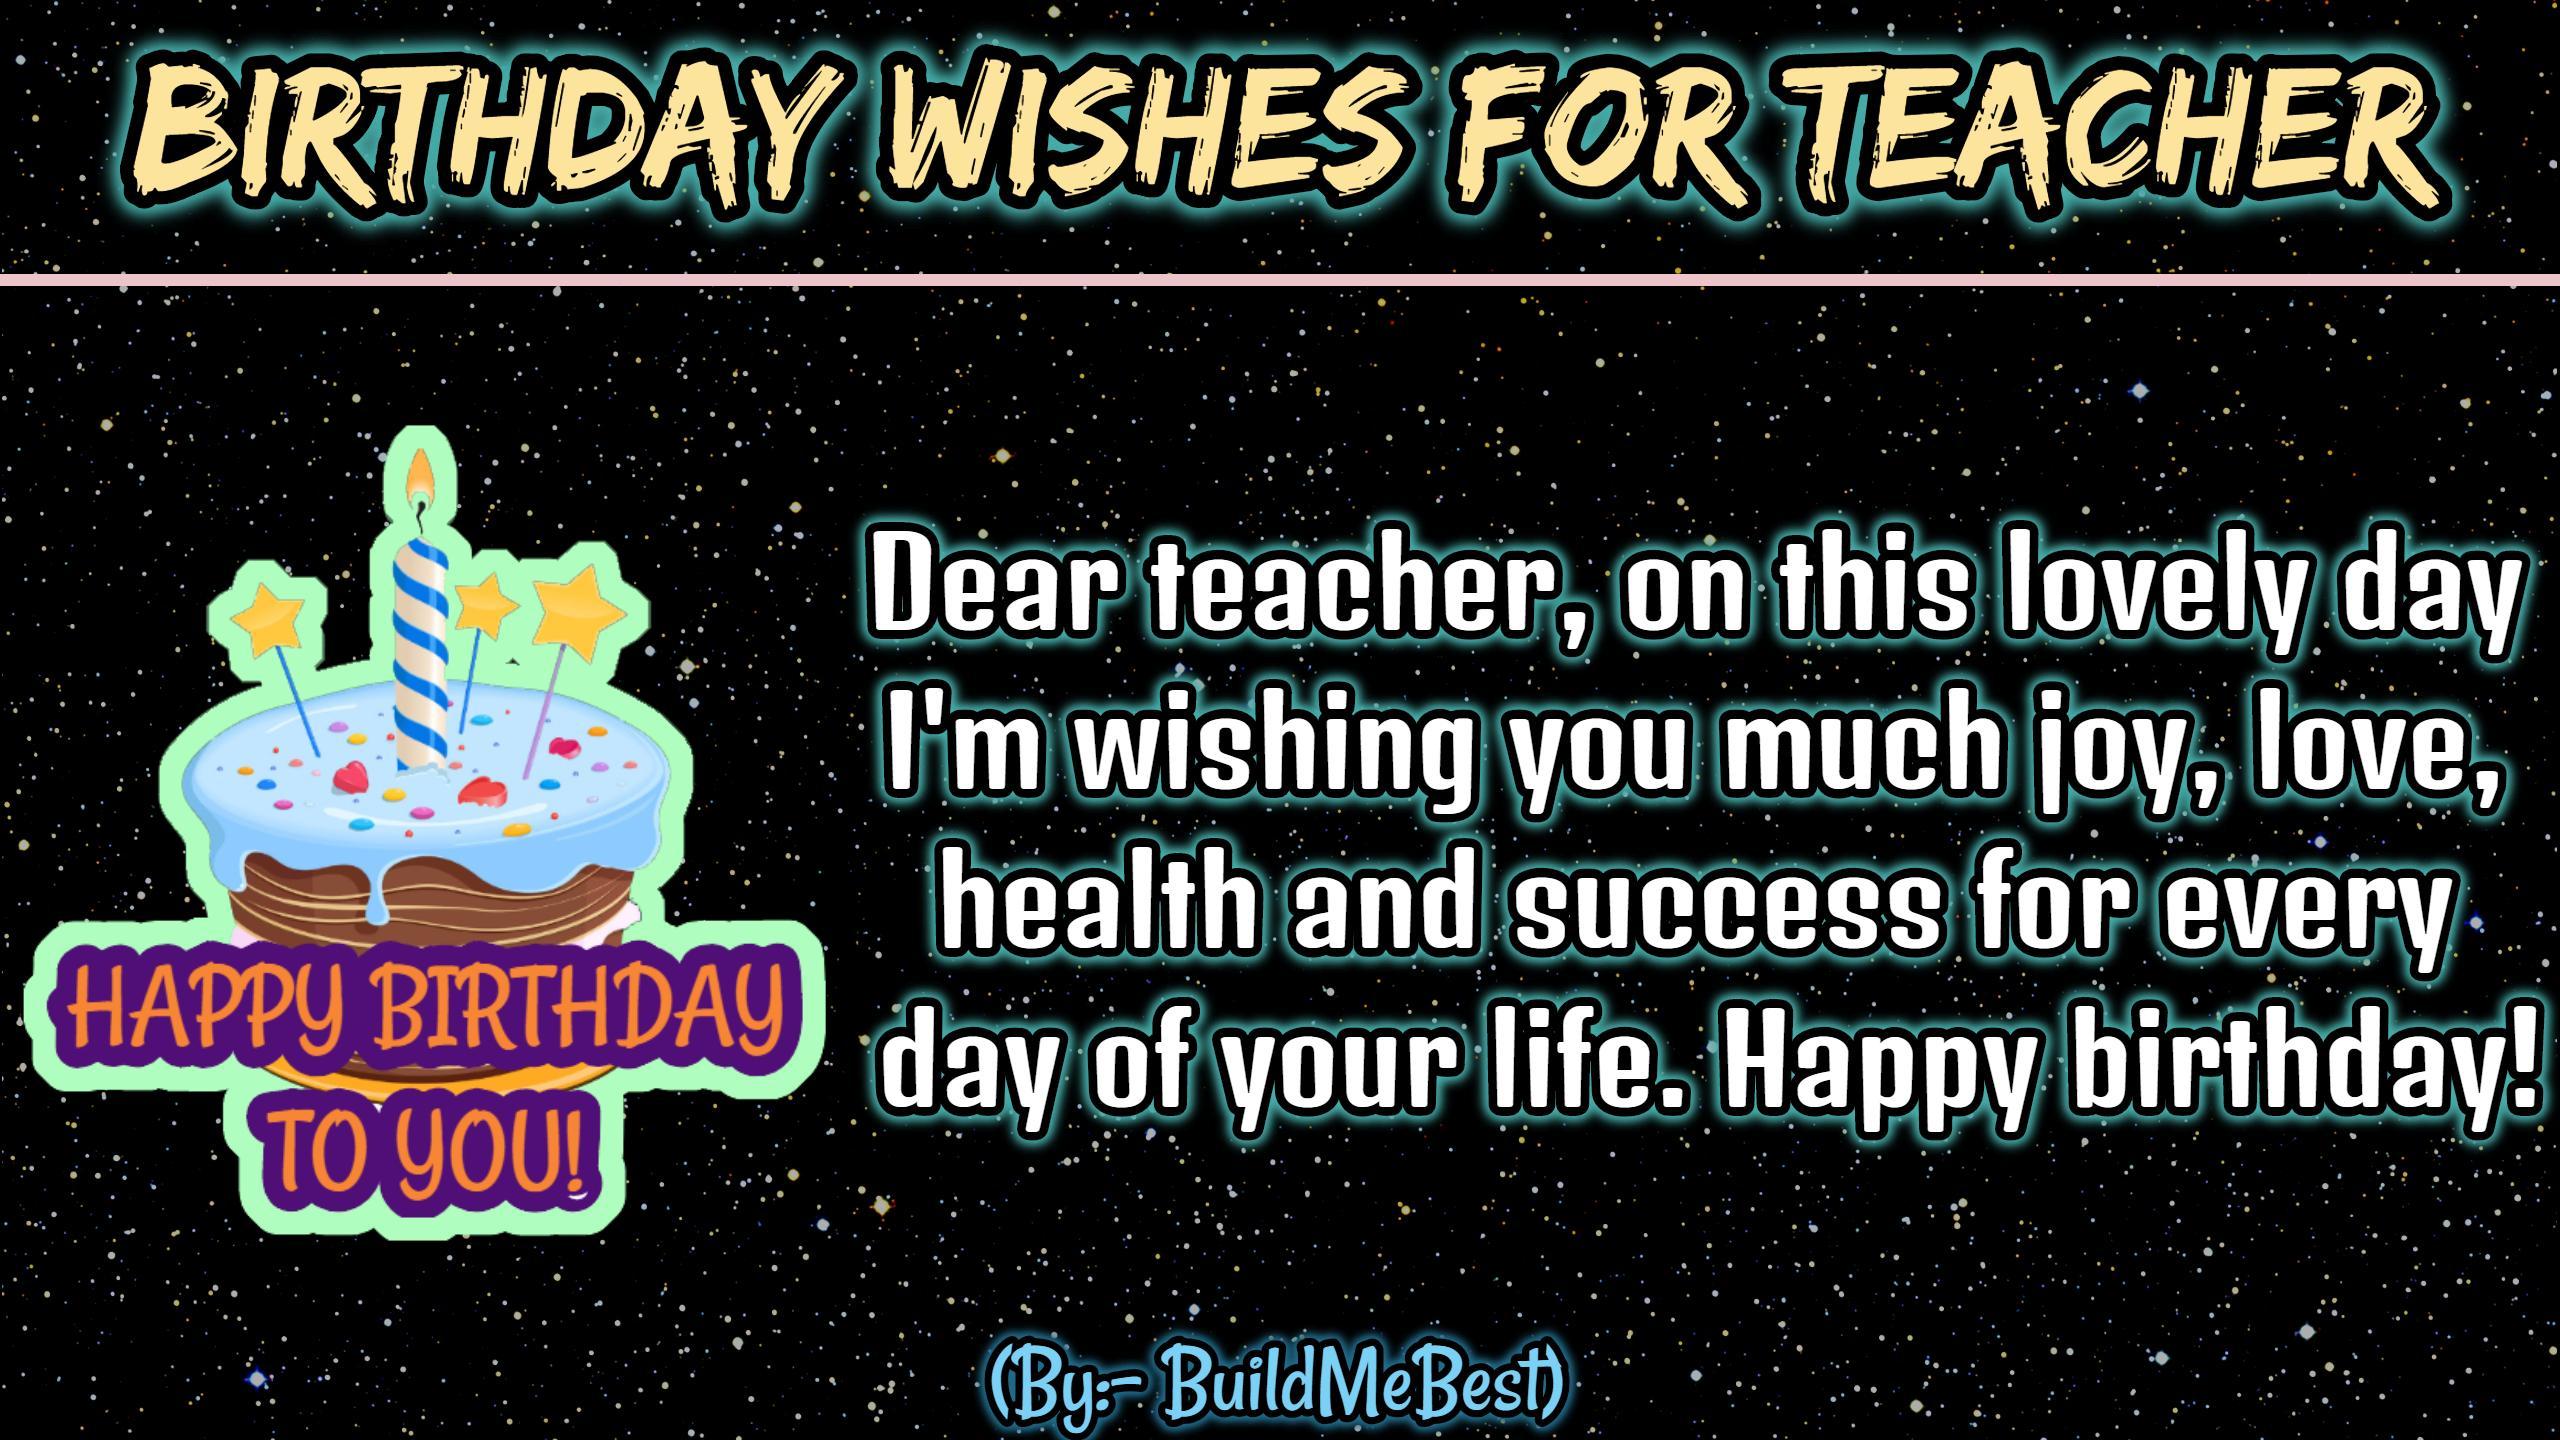 Birthday wishes for Teacher, Quotes, Greeting Card for Android - APK